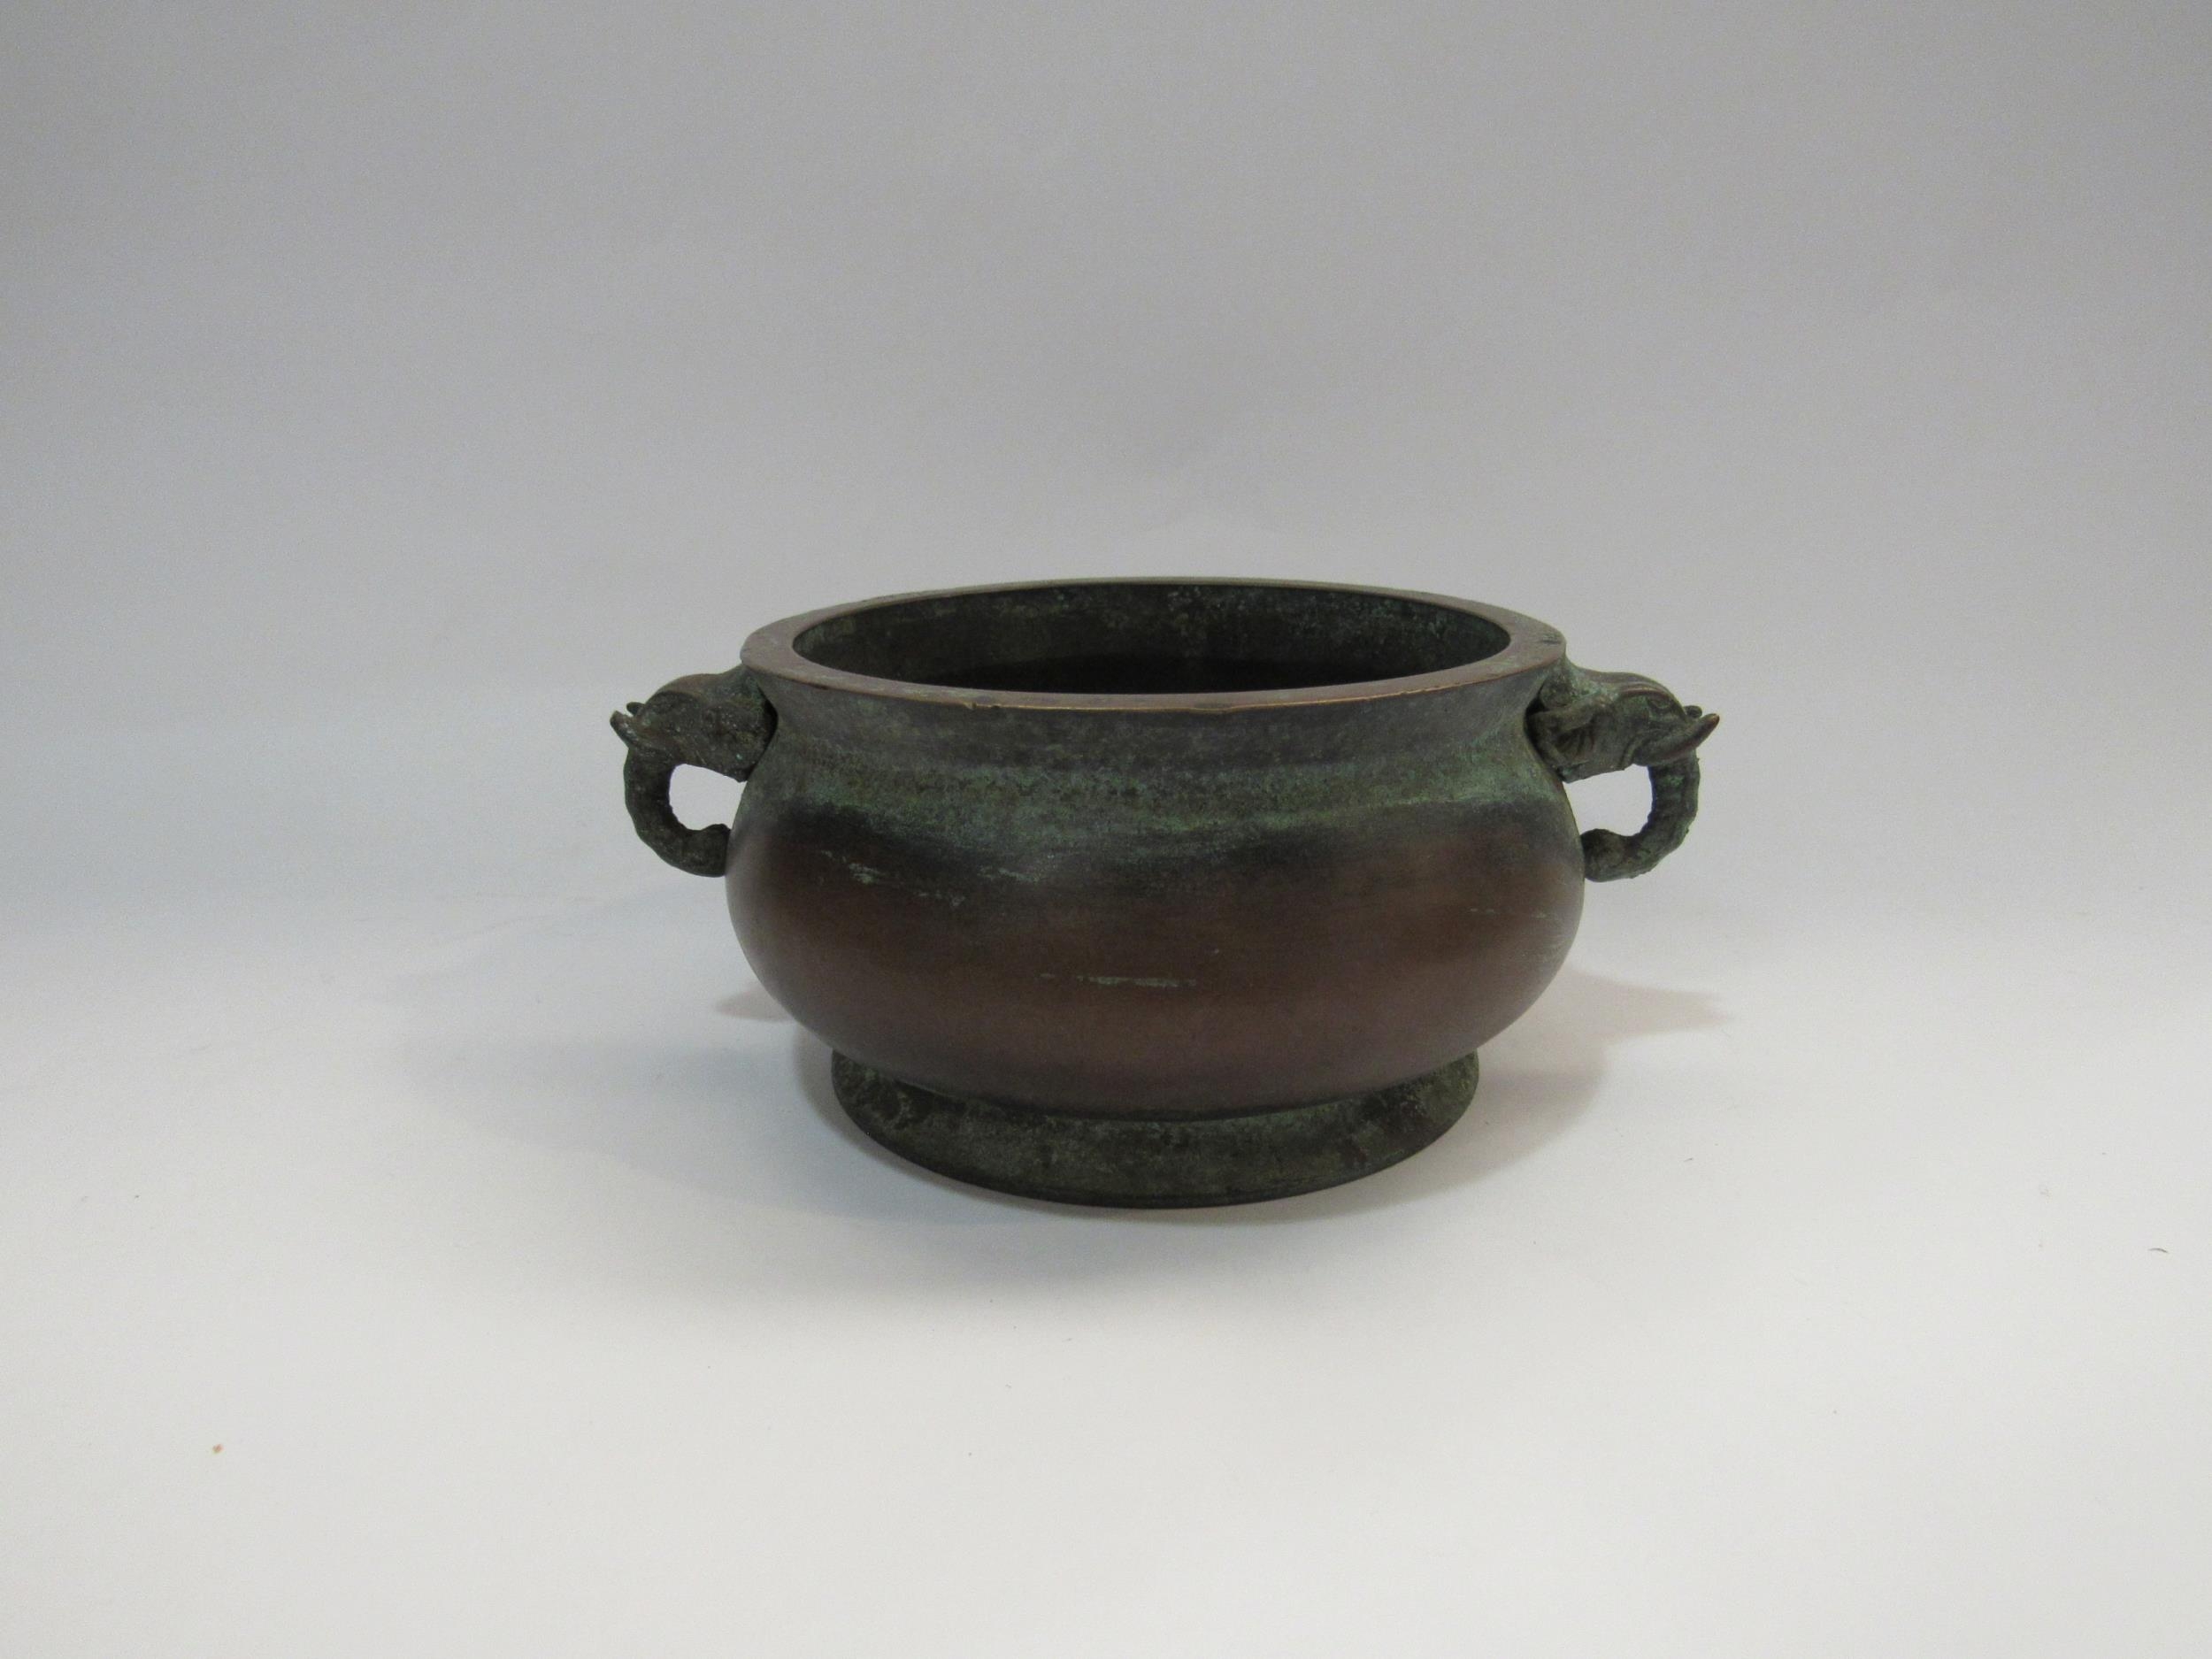 A bronze two handled censor with elephant handles and character marks